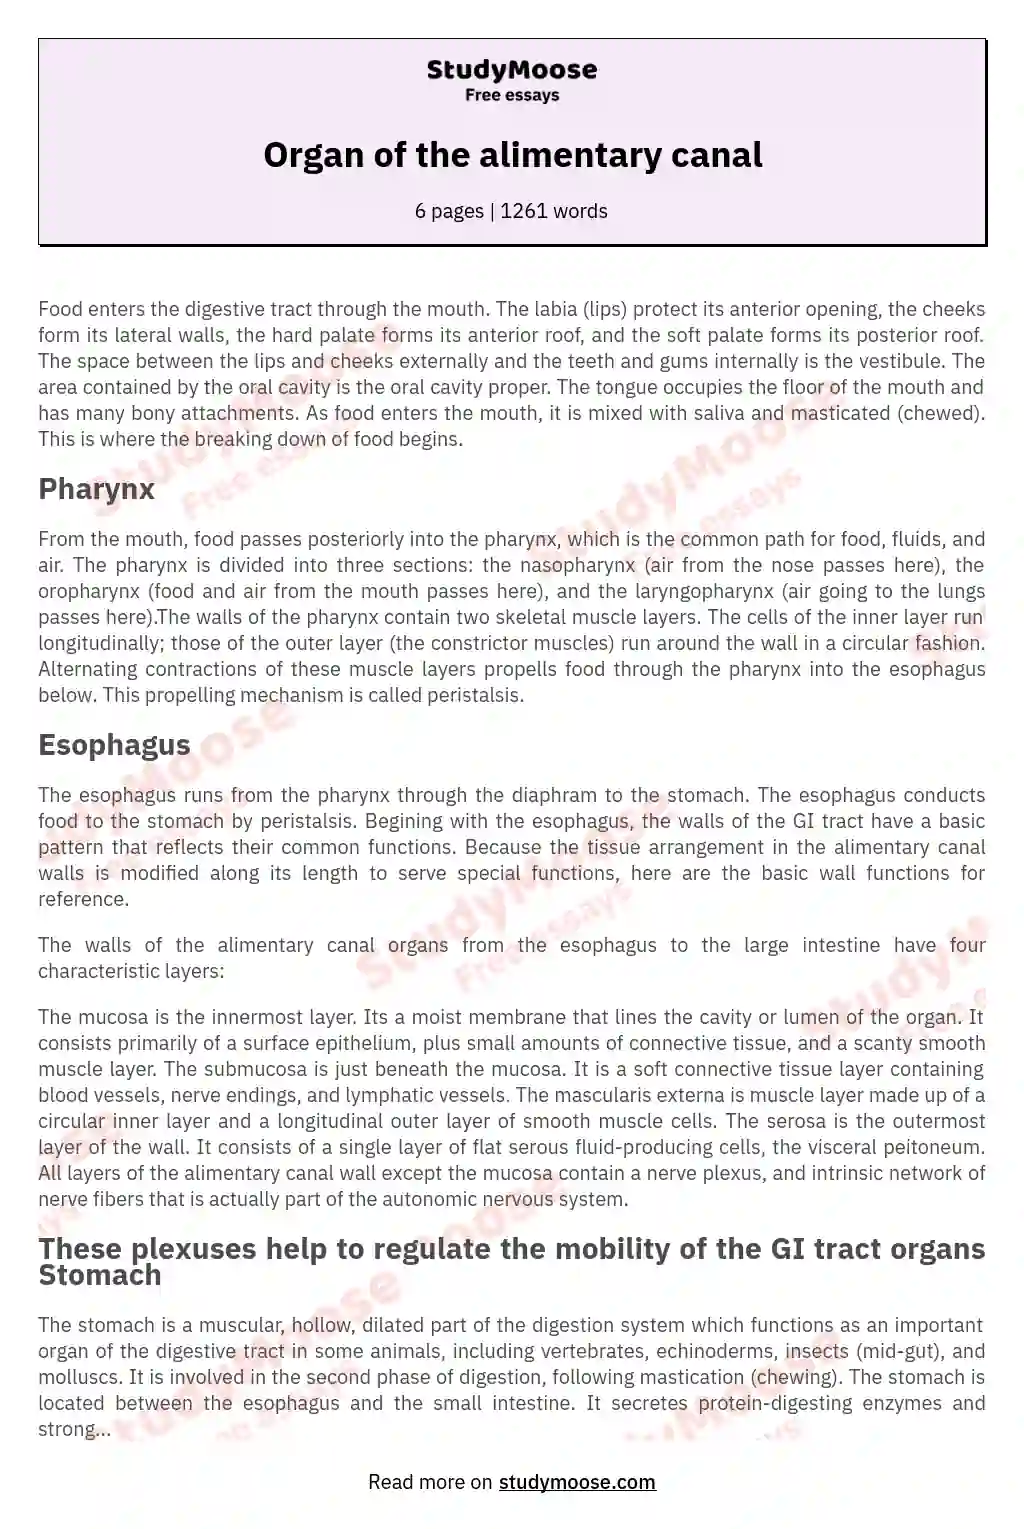 Organ of the alimentary canal essay